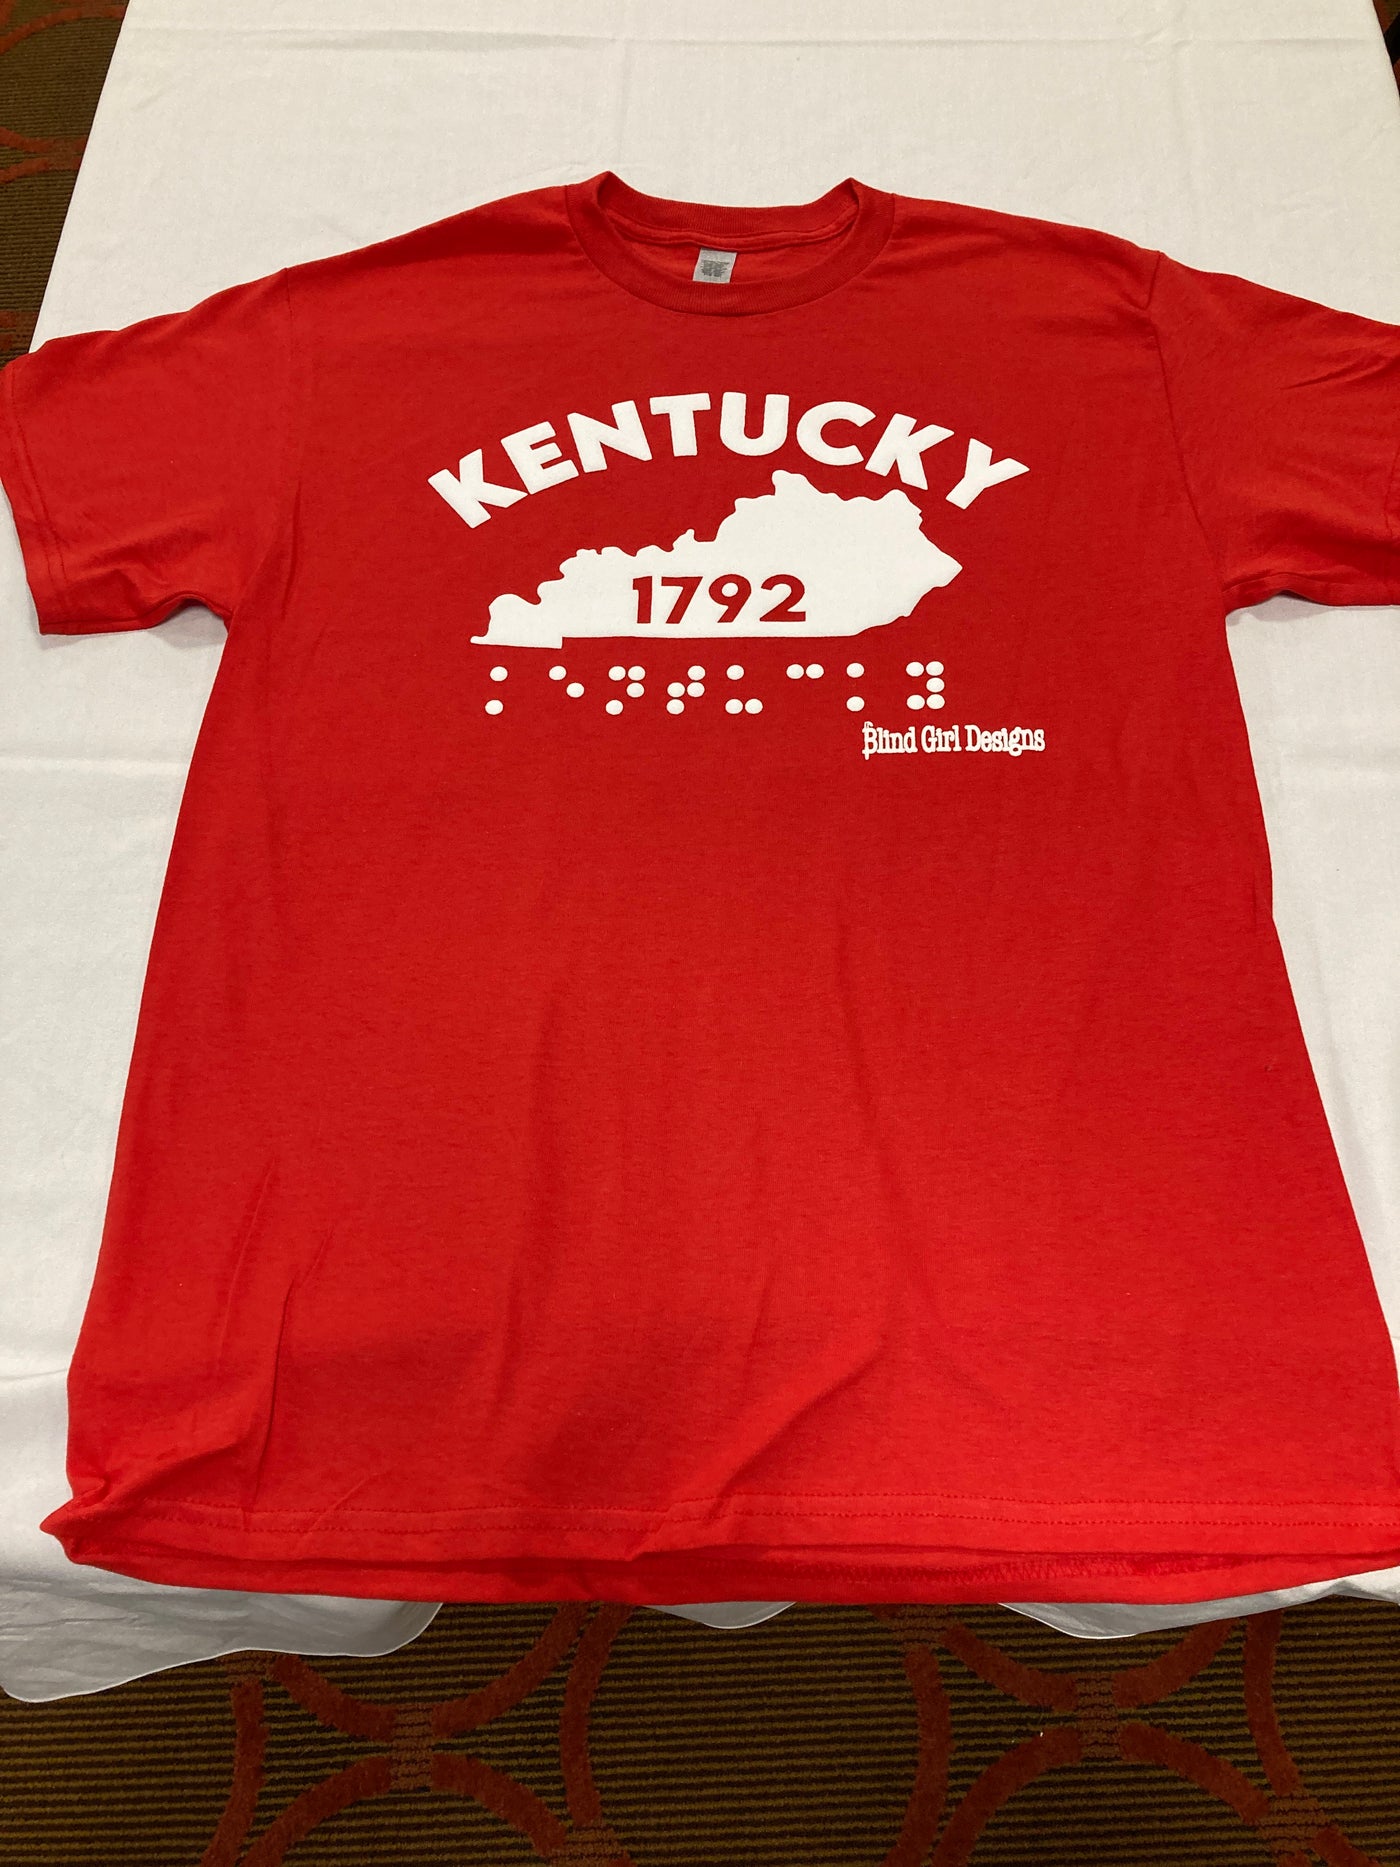 New 3D! Kentucky State Braille  T-Shirt - RED